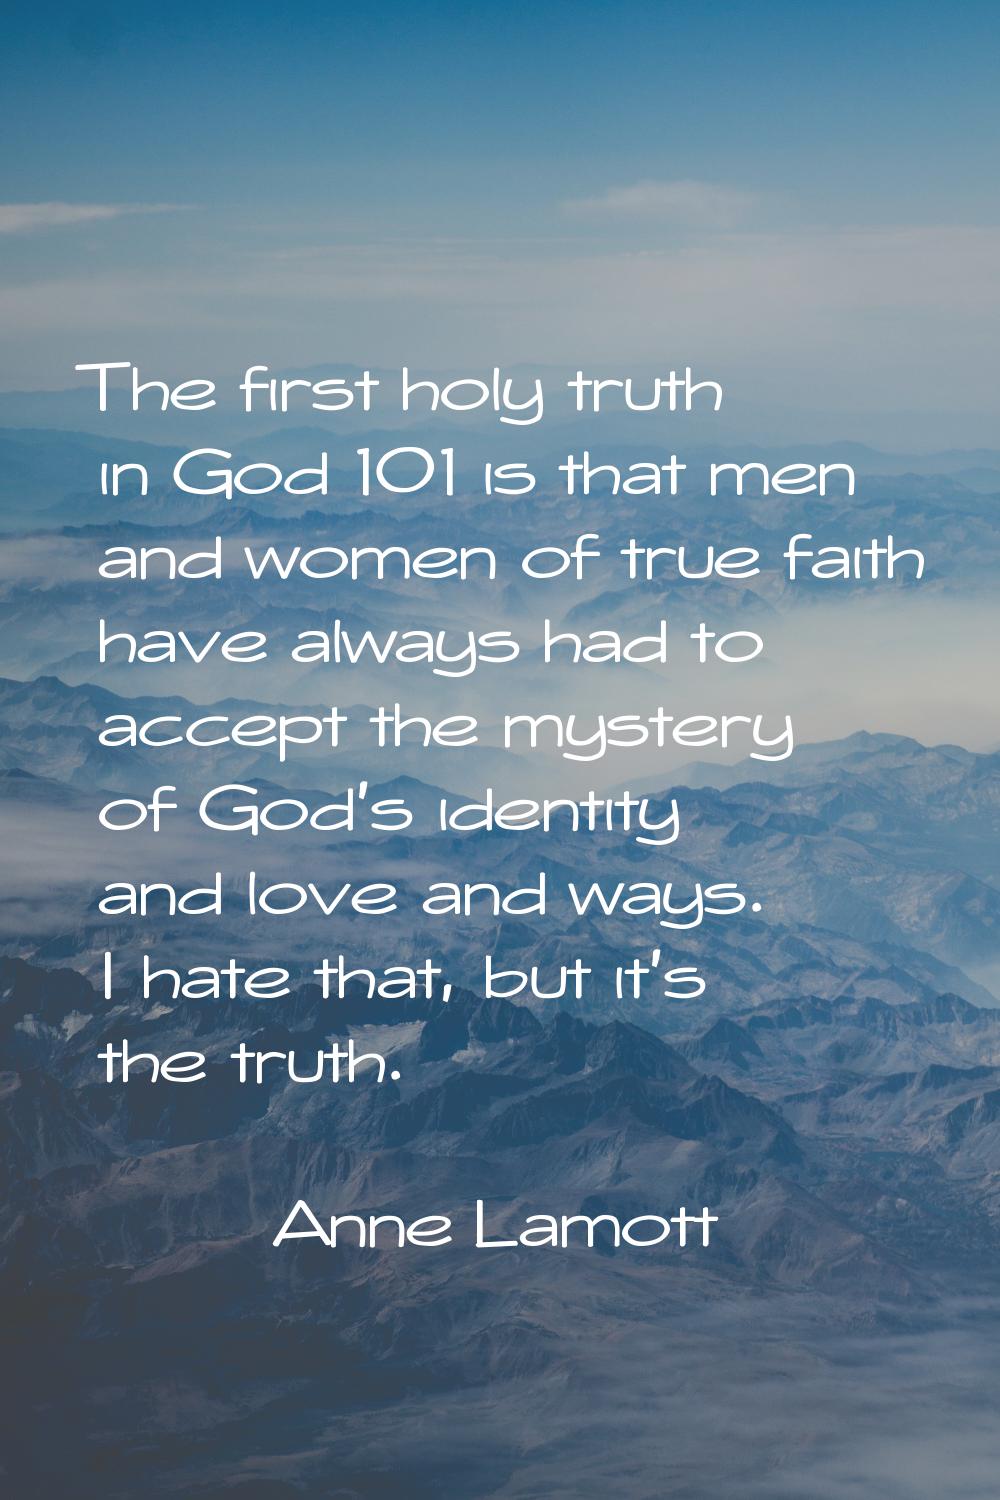 The first holy truth in God 101 is that men and women of true faith have always had to accept the m